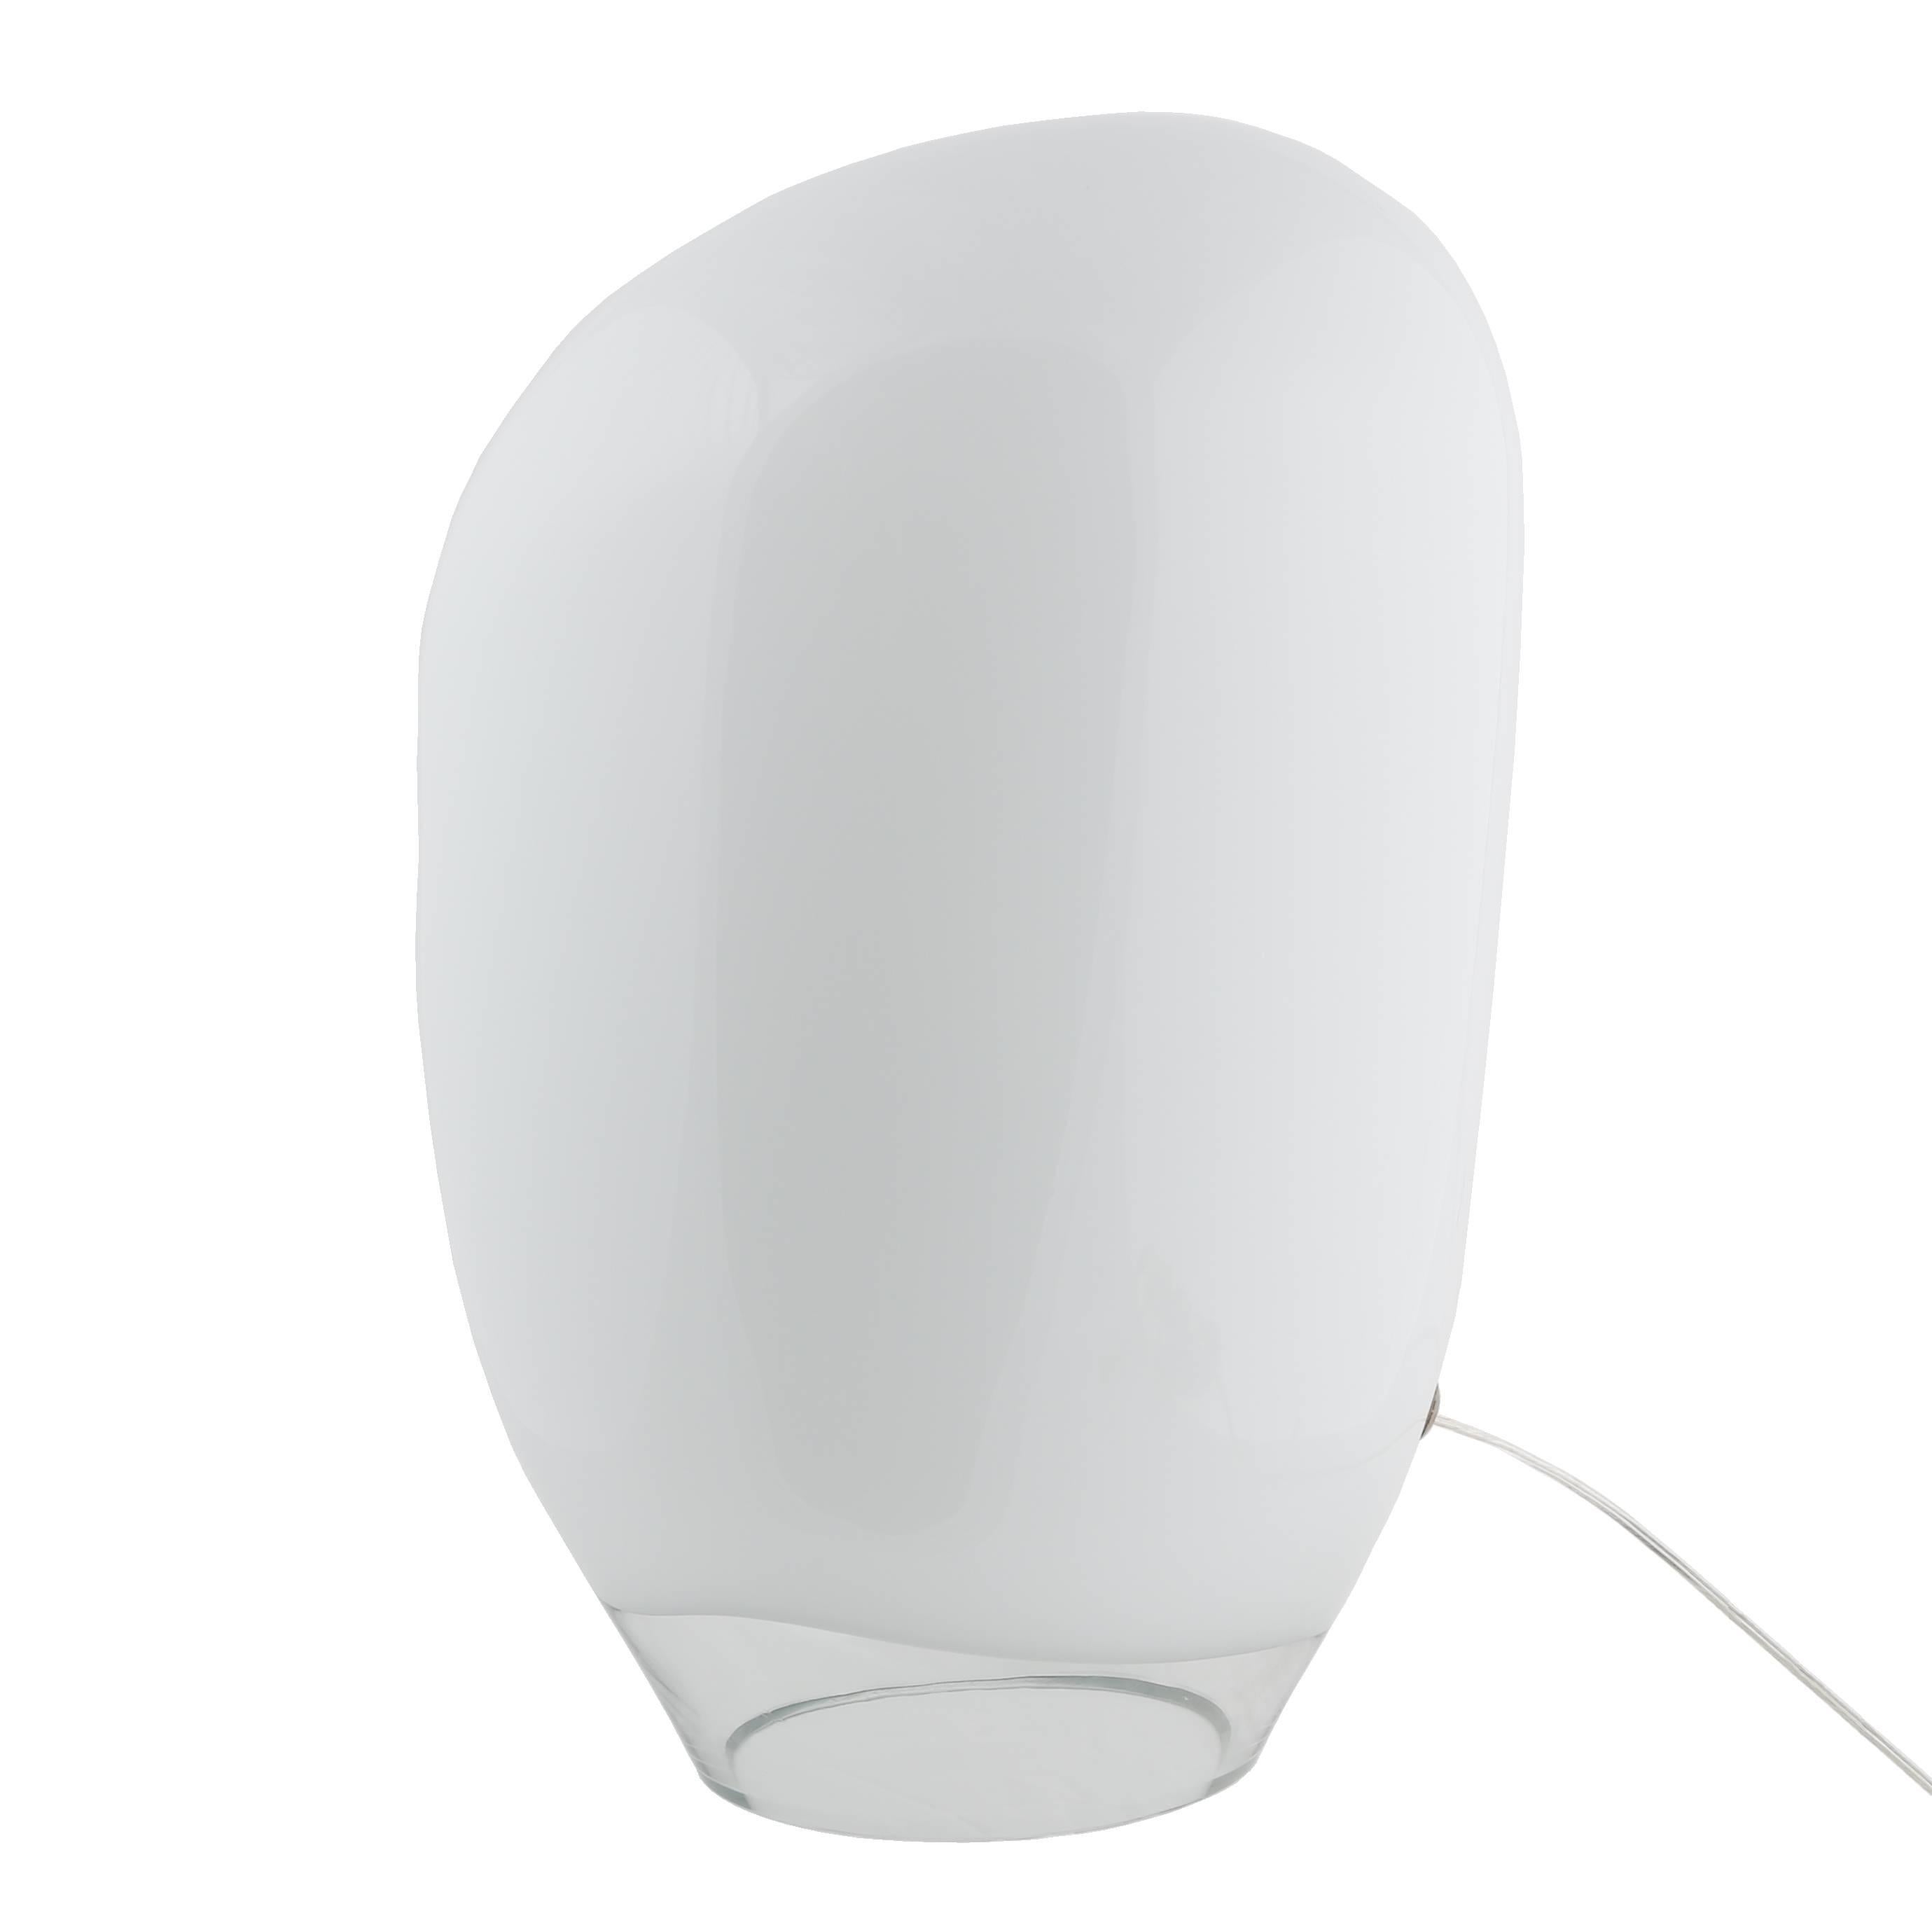 Sculptural Italian table lamp combining white and clear glass in a curvaceous biomorphic form. Takes a single standard-base bulb. Switch on cord. 